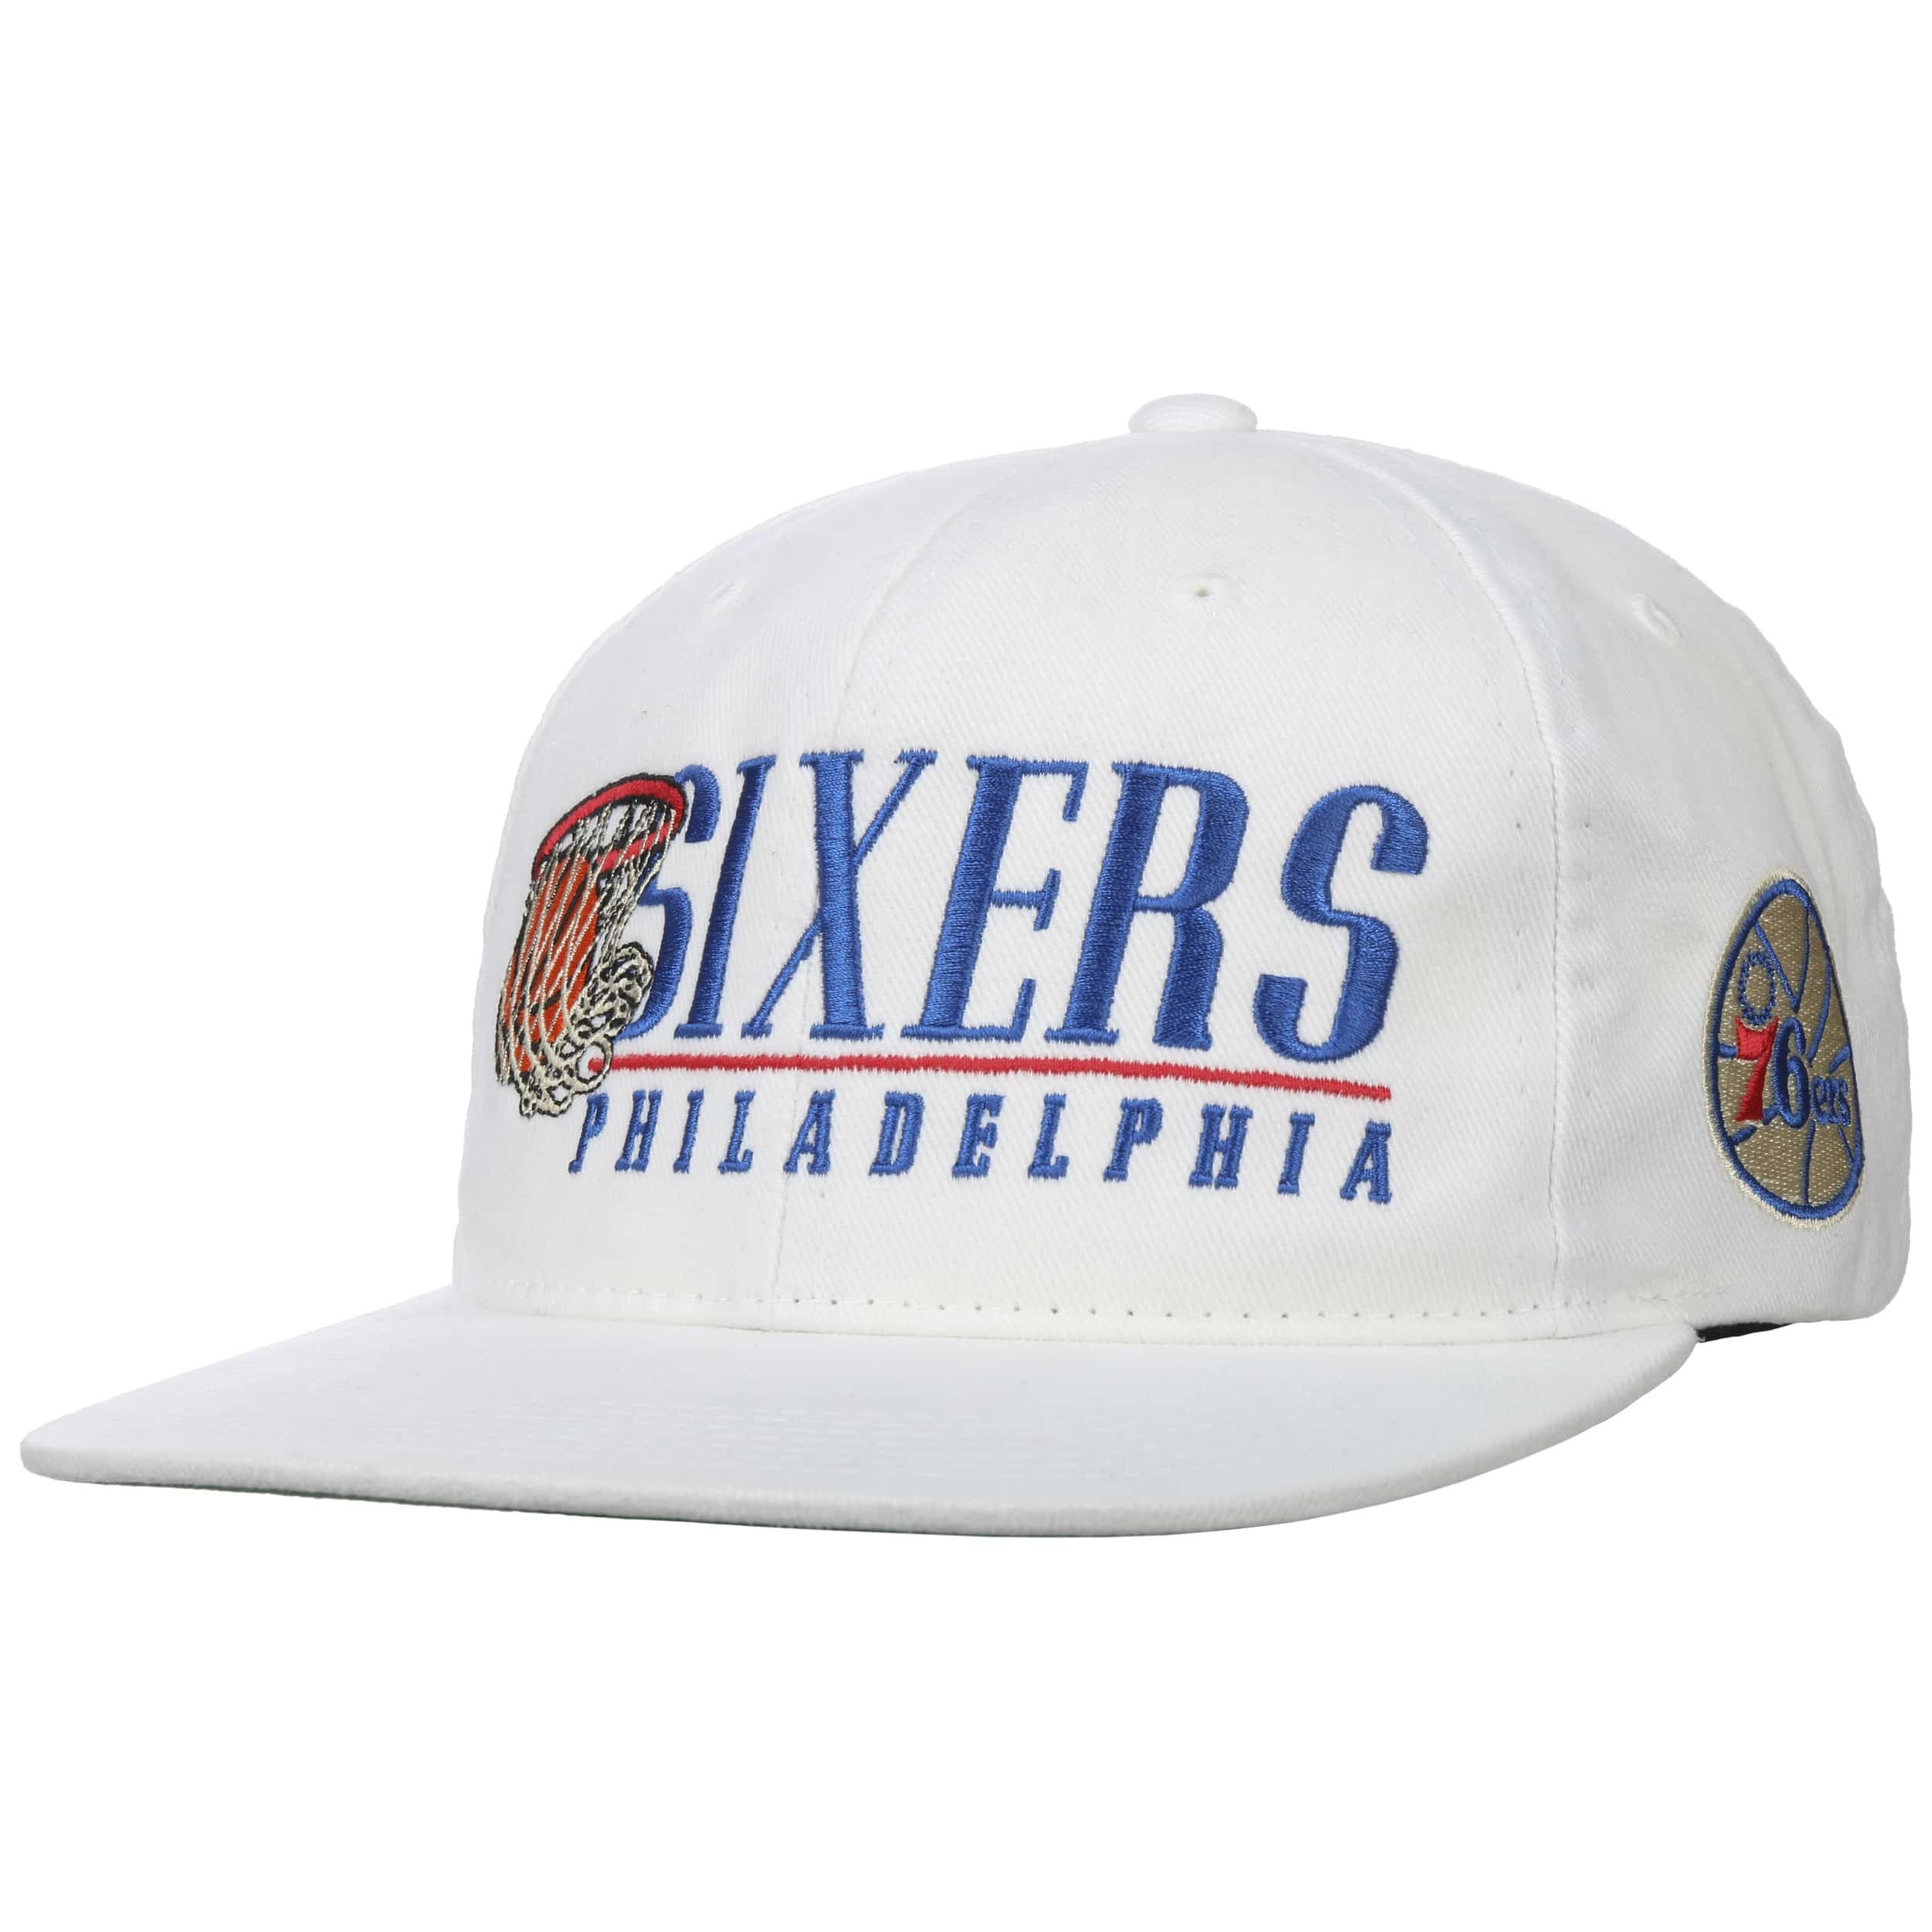 Vintage Hoop 76ers Cap By Mitchell Ness 36 95